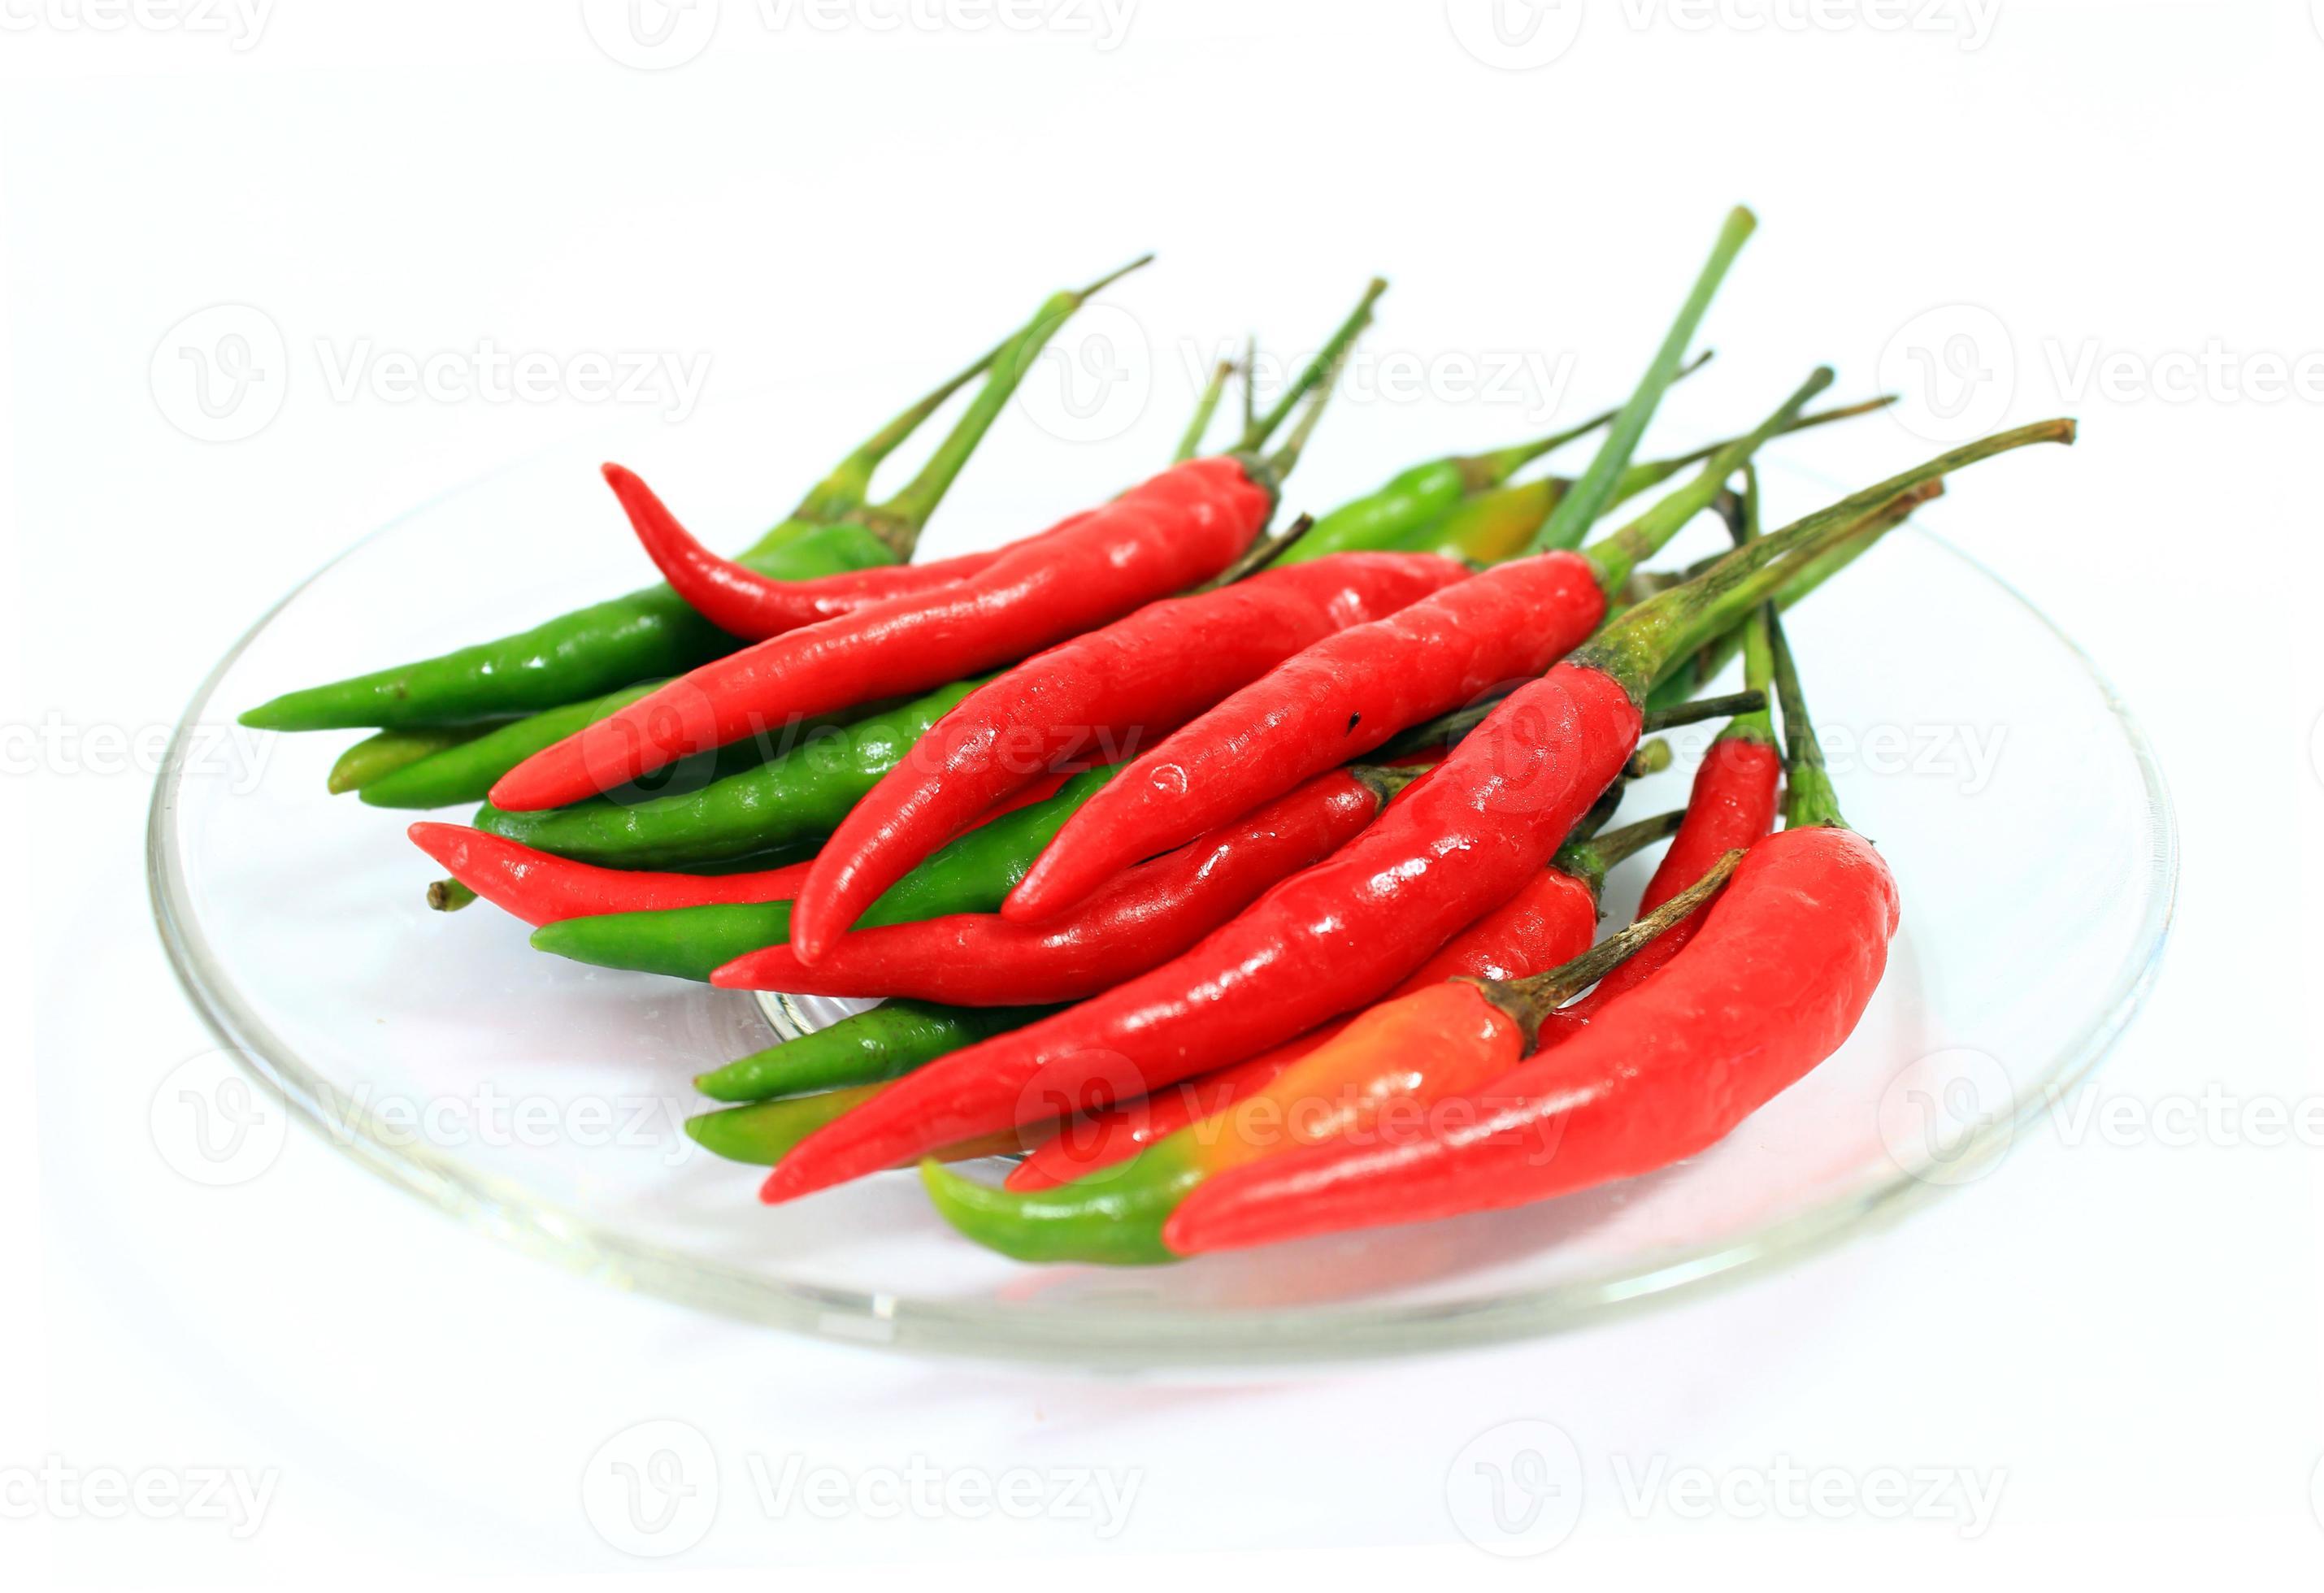 Red and green chili peppers photo